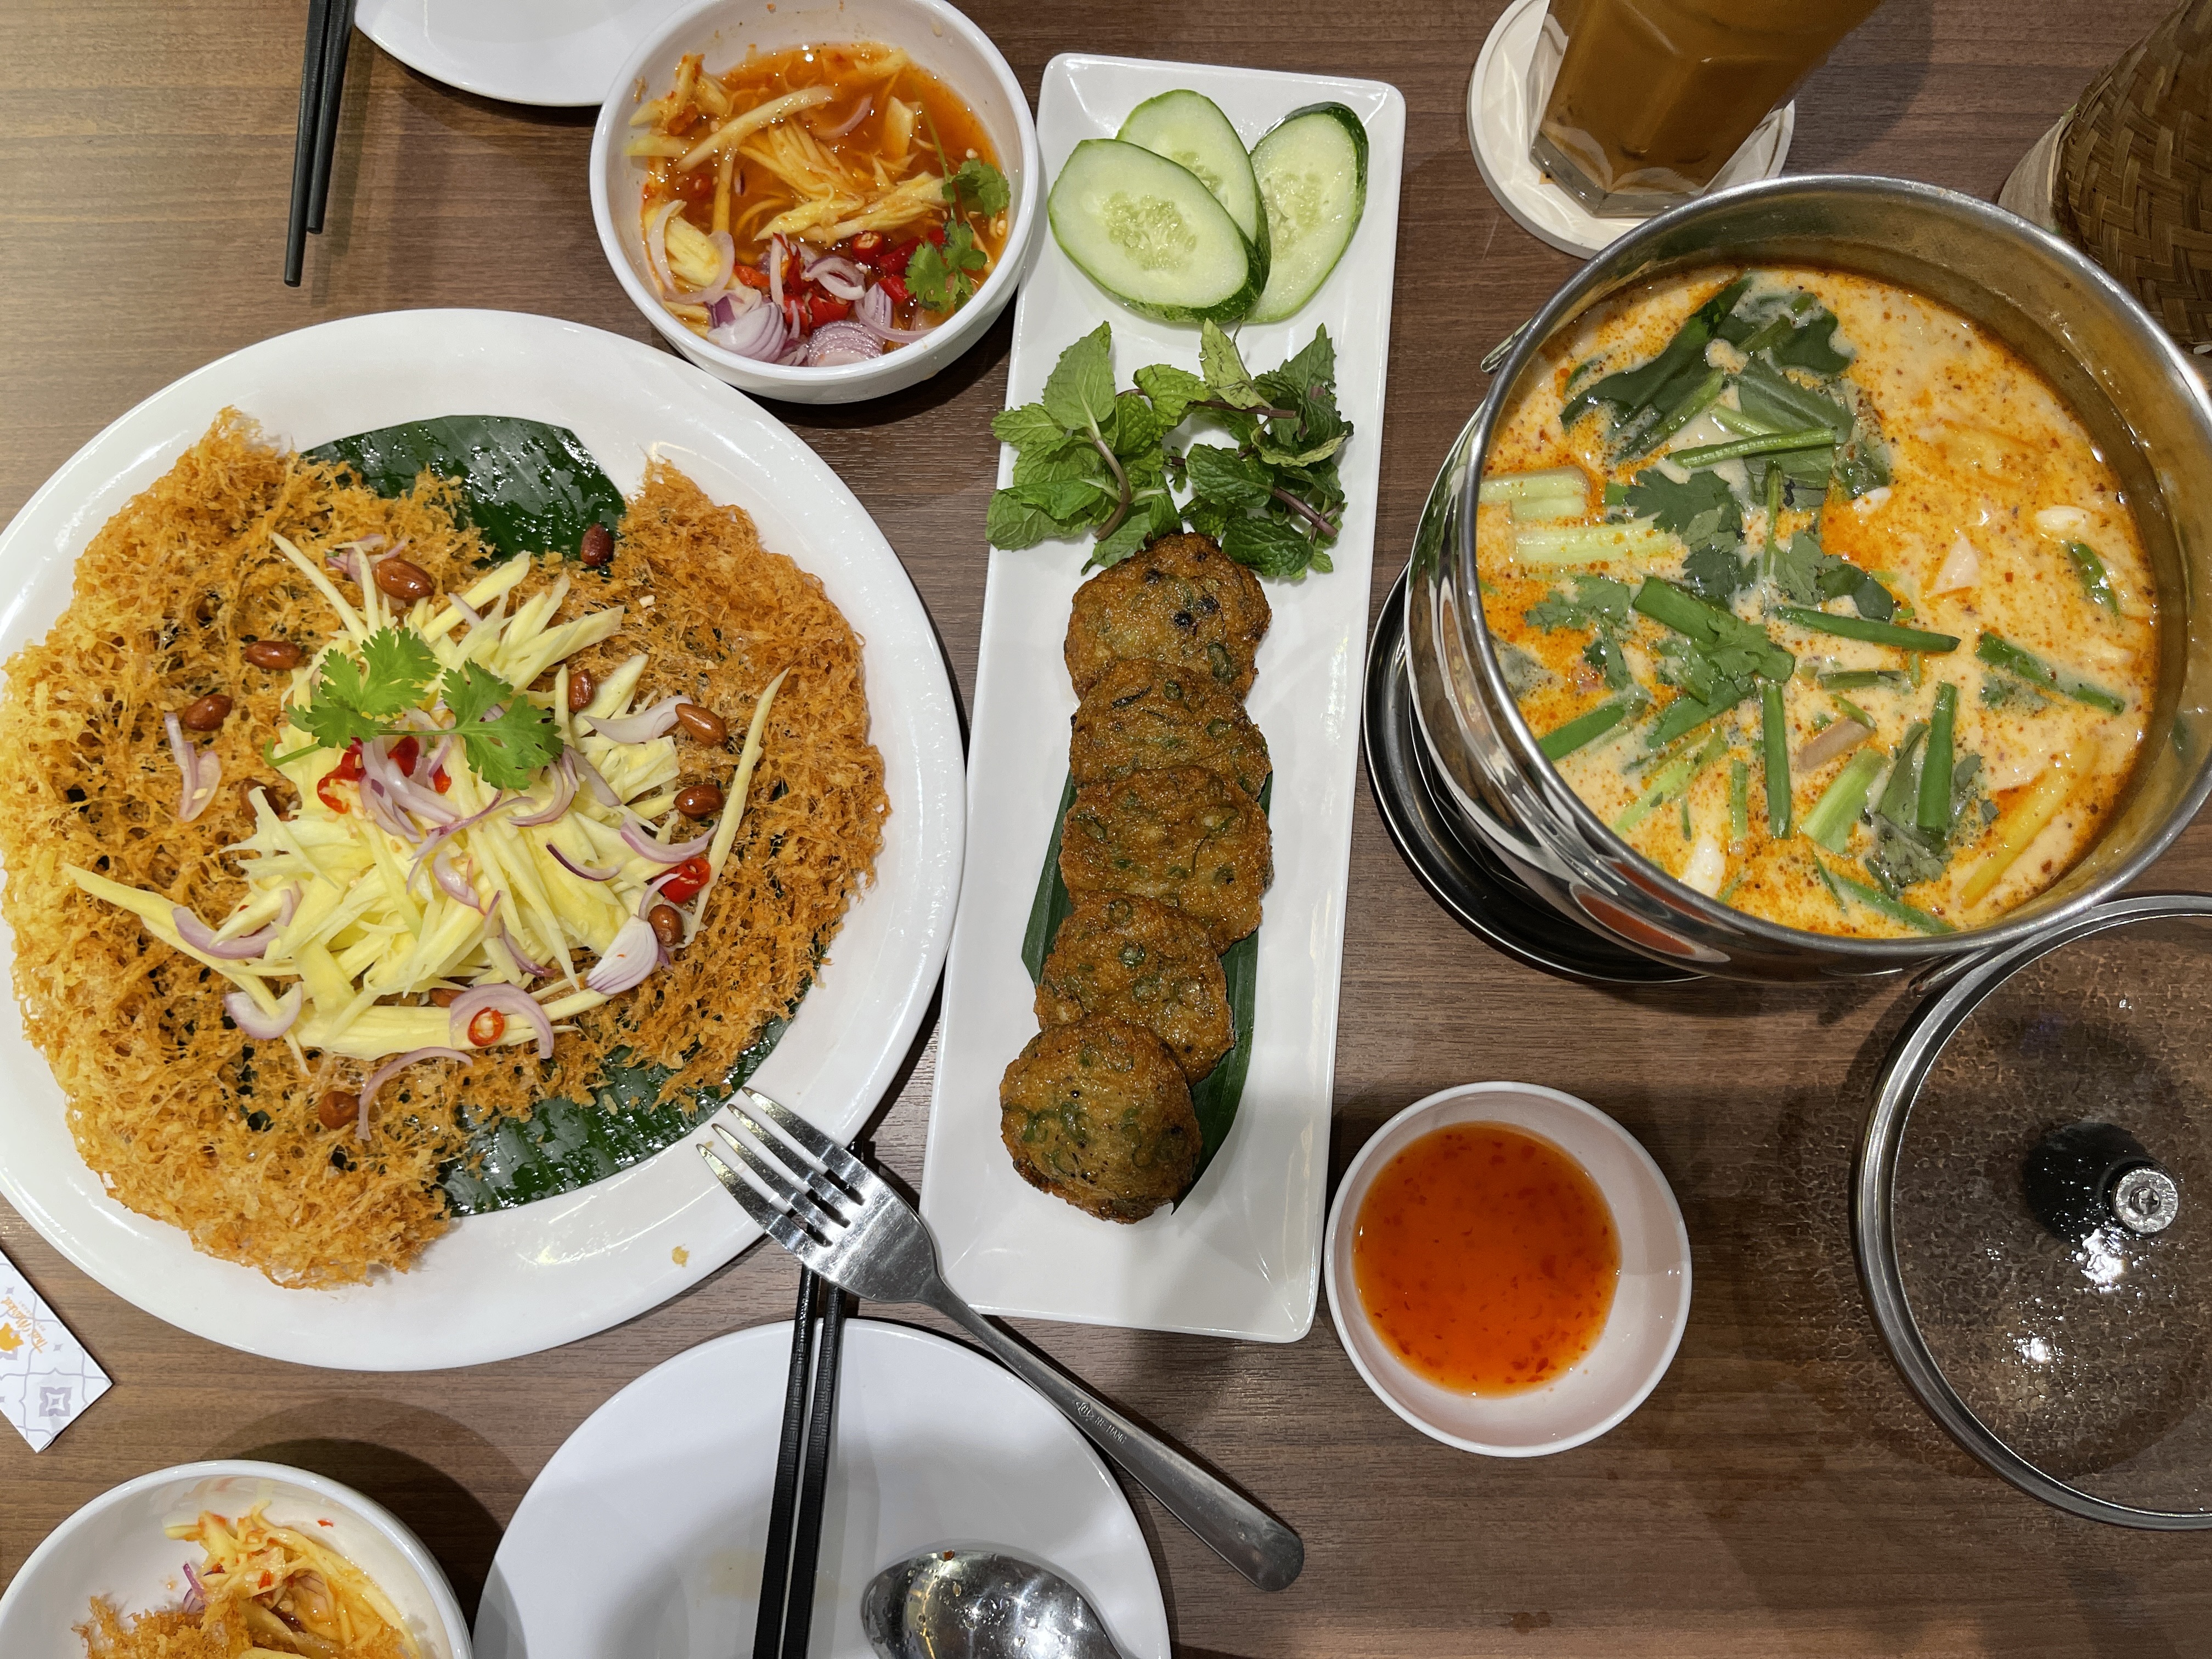 Food is served at a Thai restaurant in District 3, Ho Chi Minh City. Photo: Dong Nguyen / Tuoi Tre News